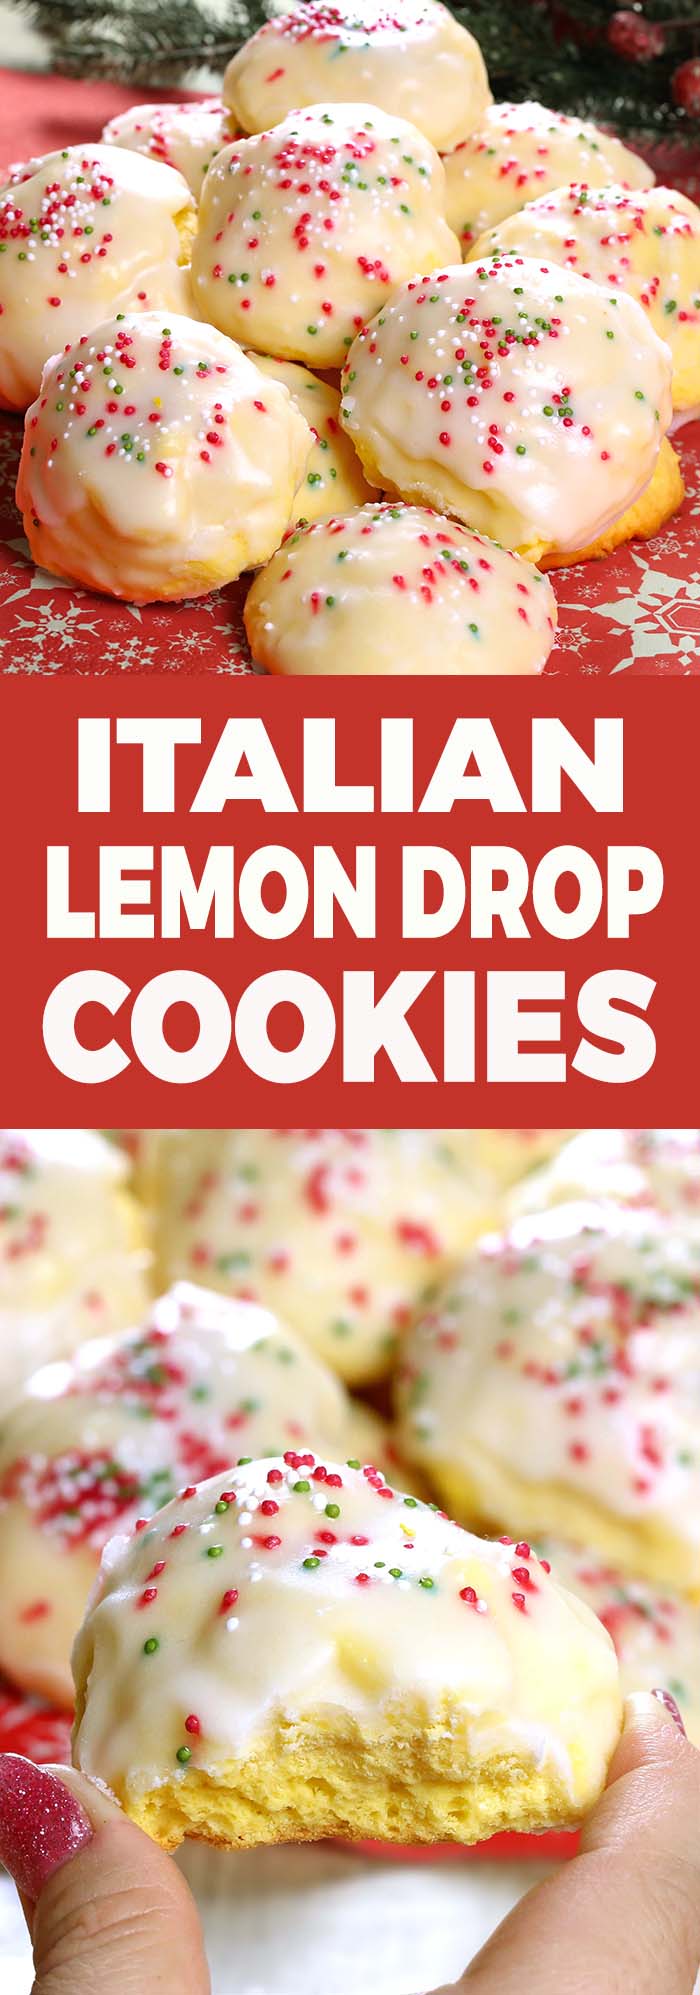 Lemon drop cookies, iced Italian cookies or anginetti, whatever your family calls them you’ll be sure to find these traditional Italian cookies at many special occasions and holiday cookie trays.